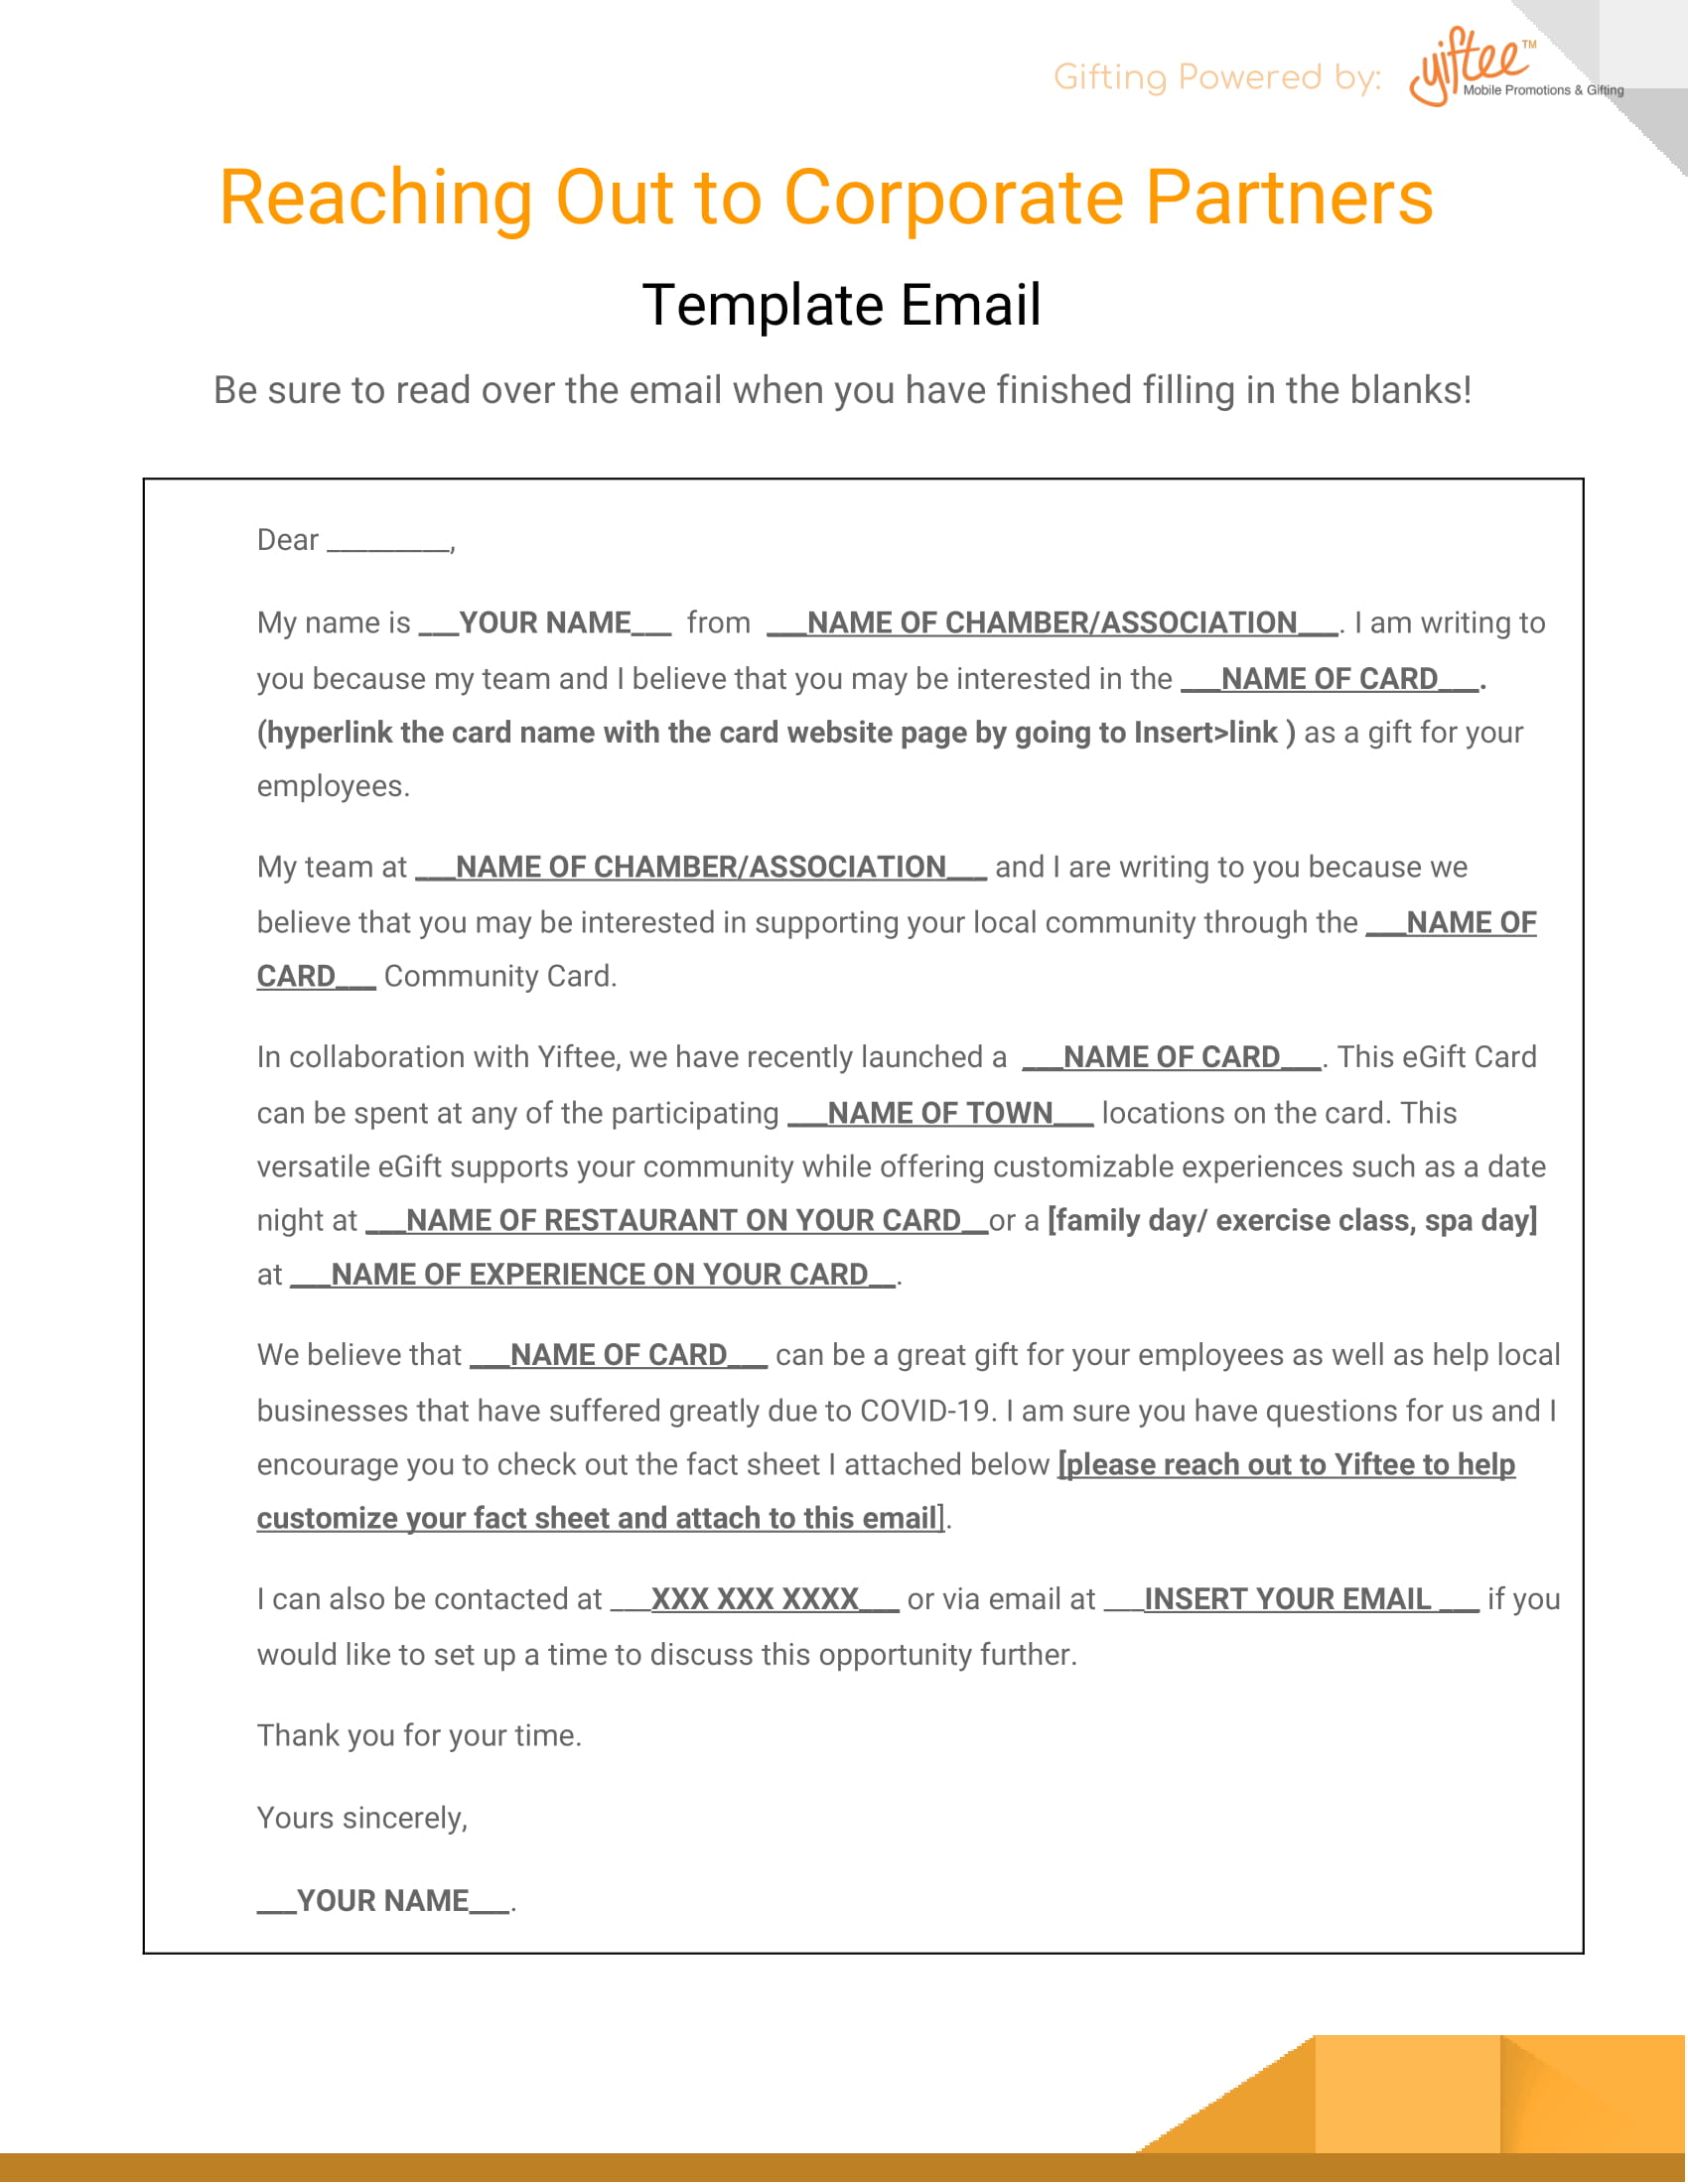 Corp_Partner_Template_Email-1.jpg